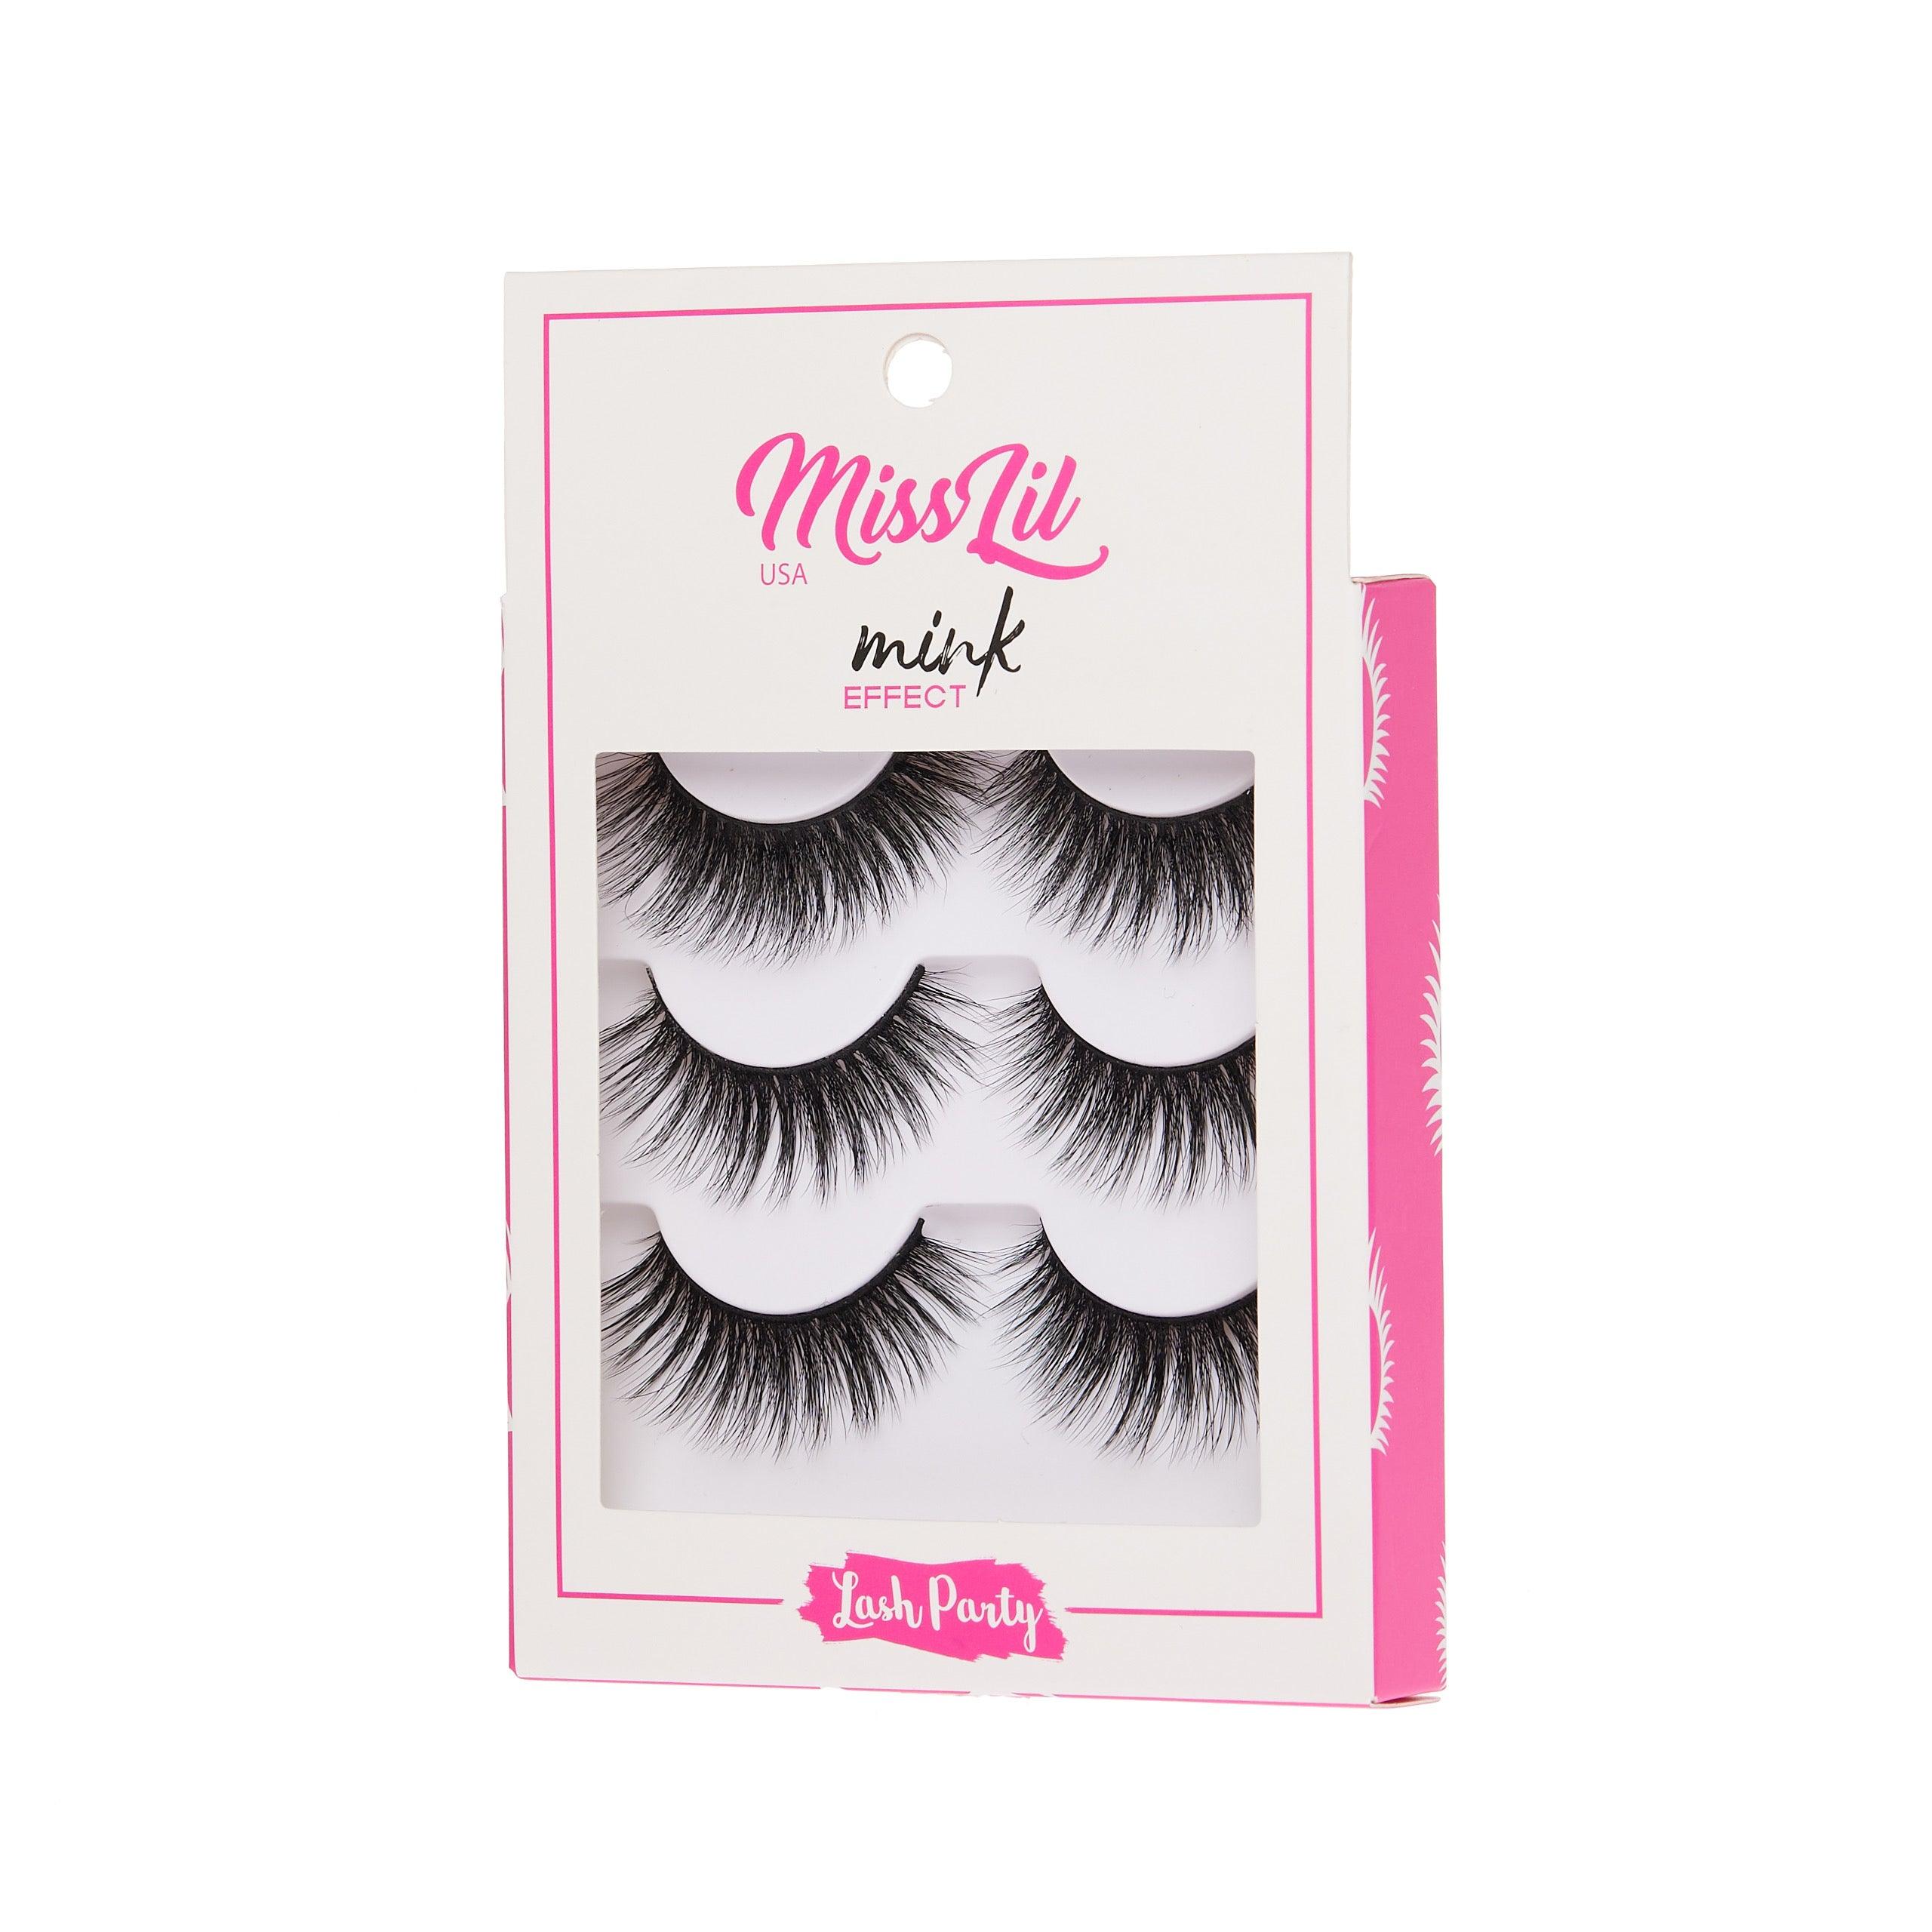 3-Pair Faux Mink Effect Lashes - Lash Party Collection number 3 - Pack of 3